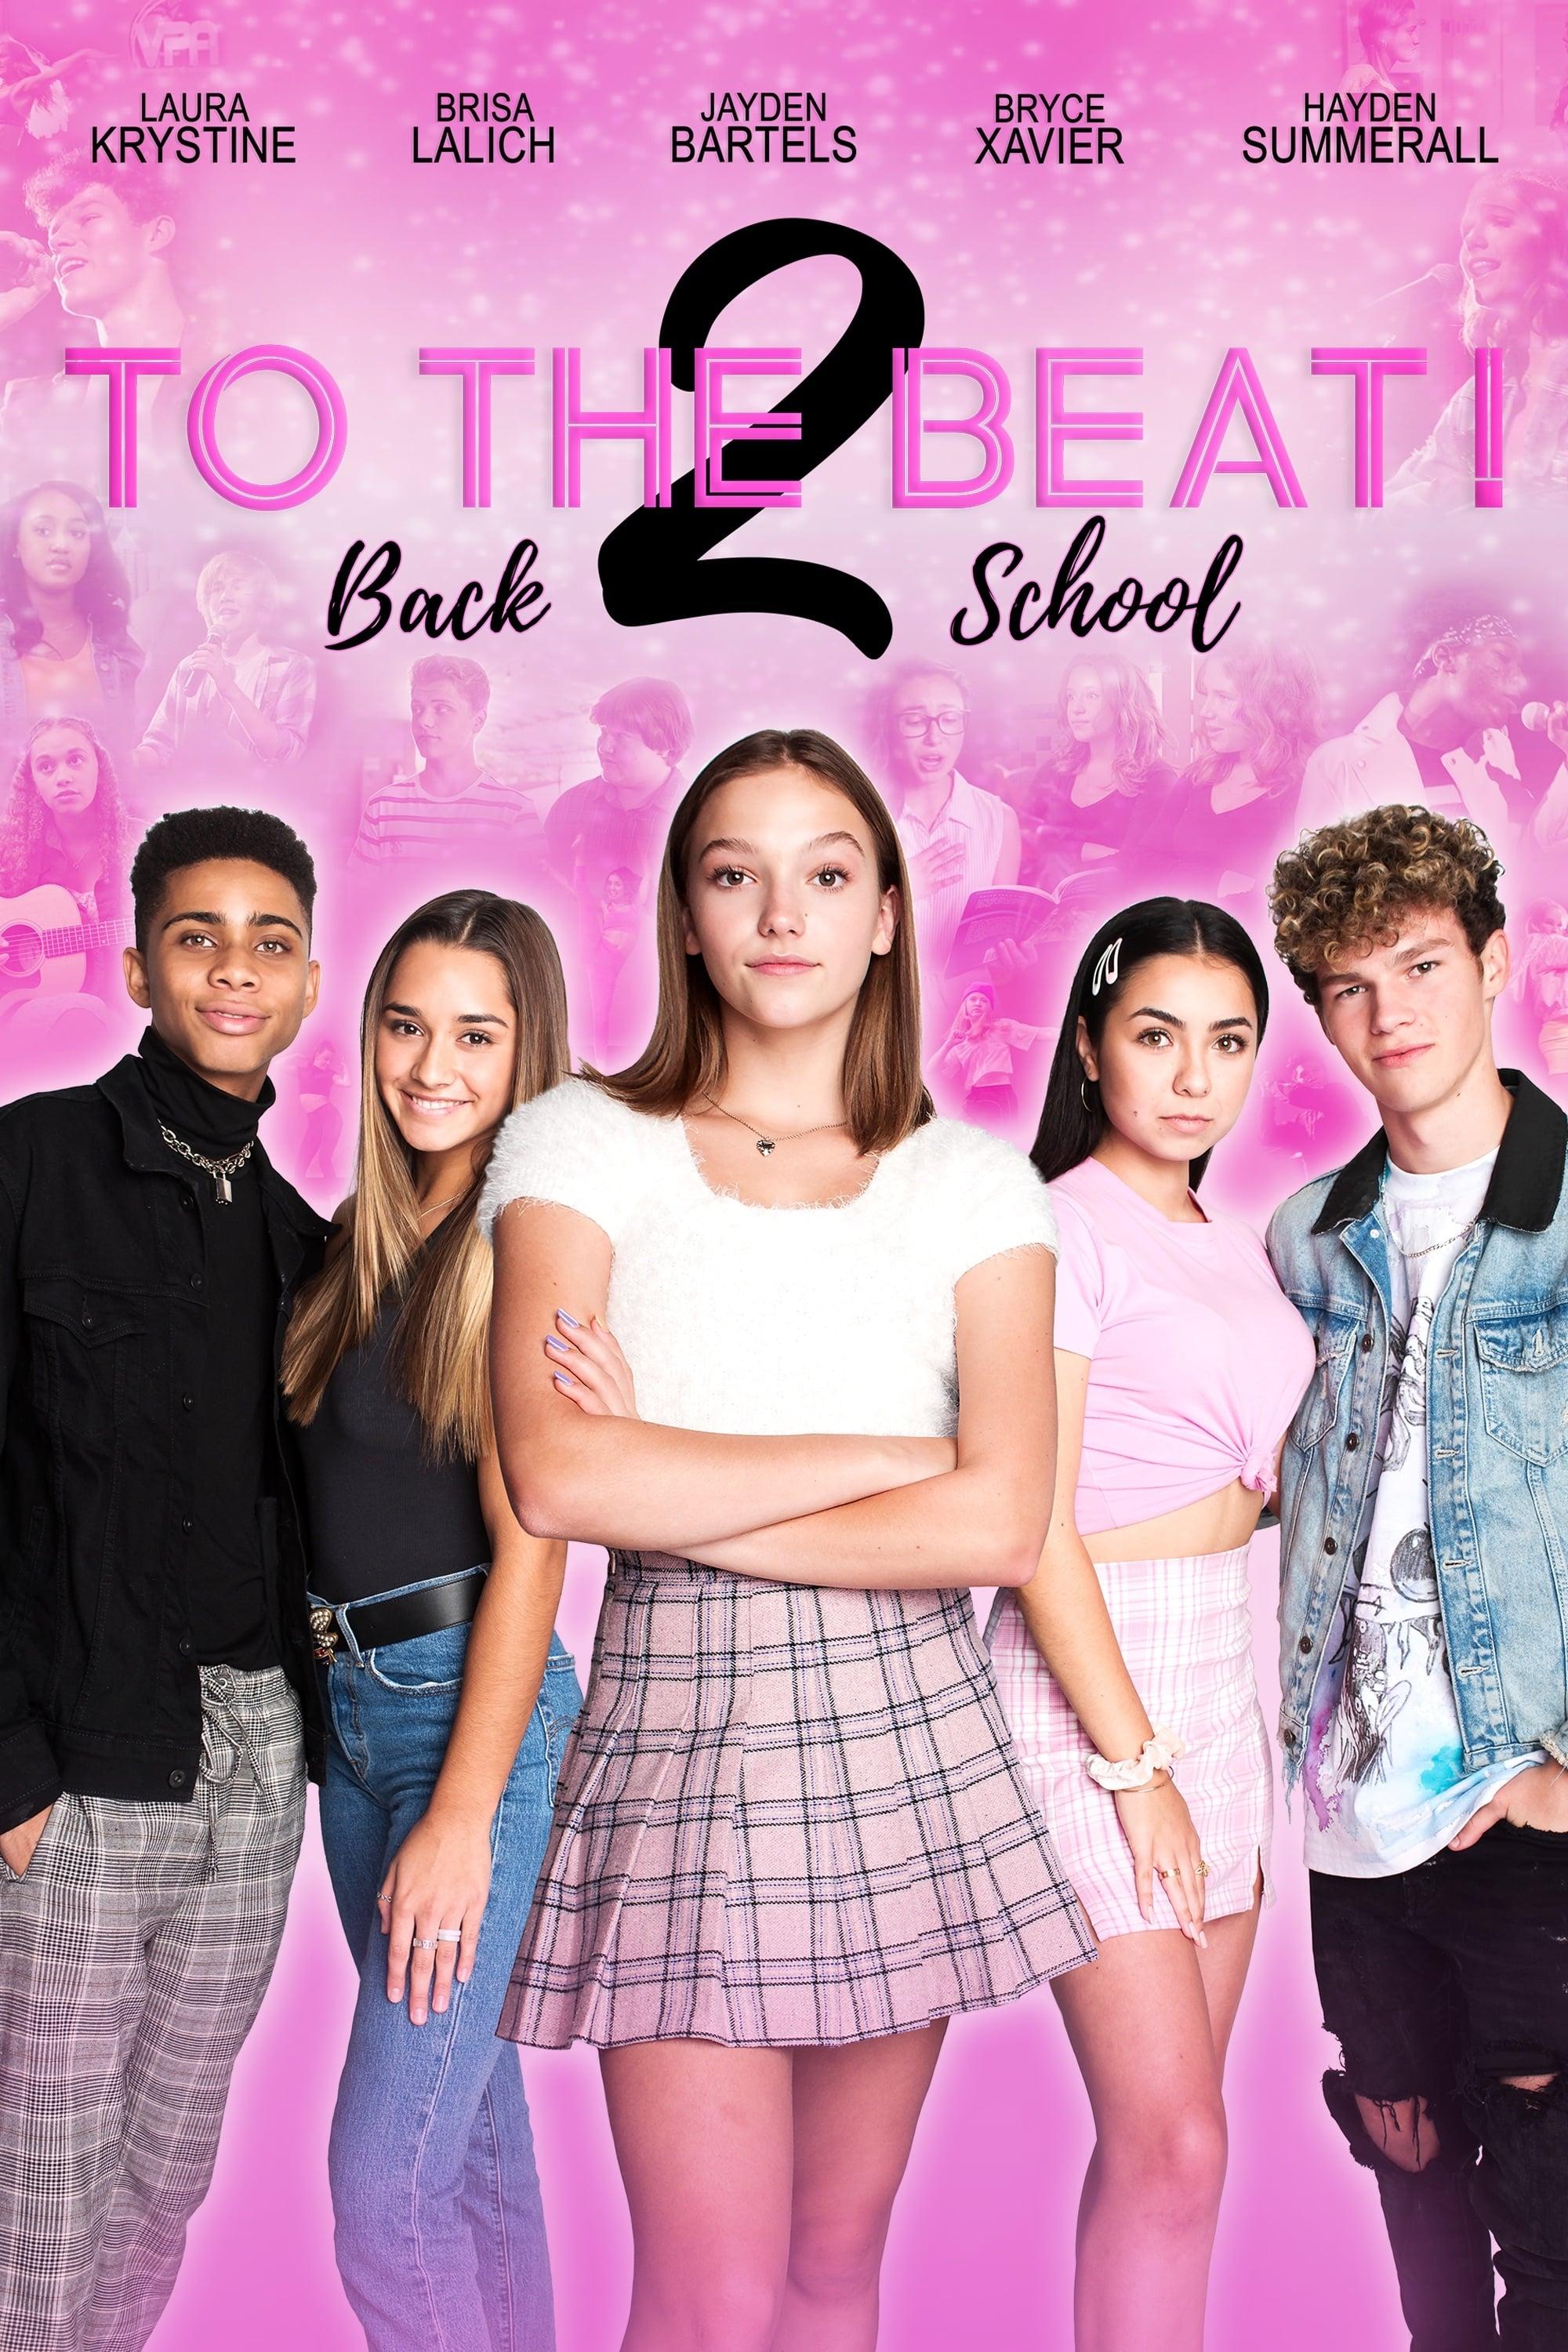 To the Beat! Back 2 School poster